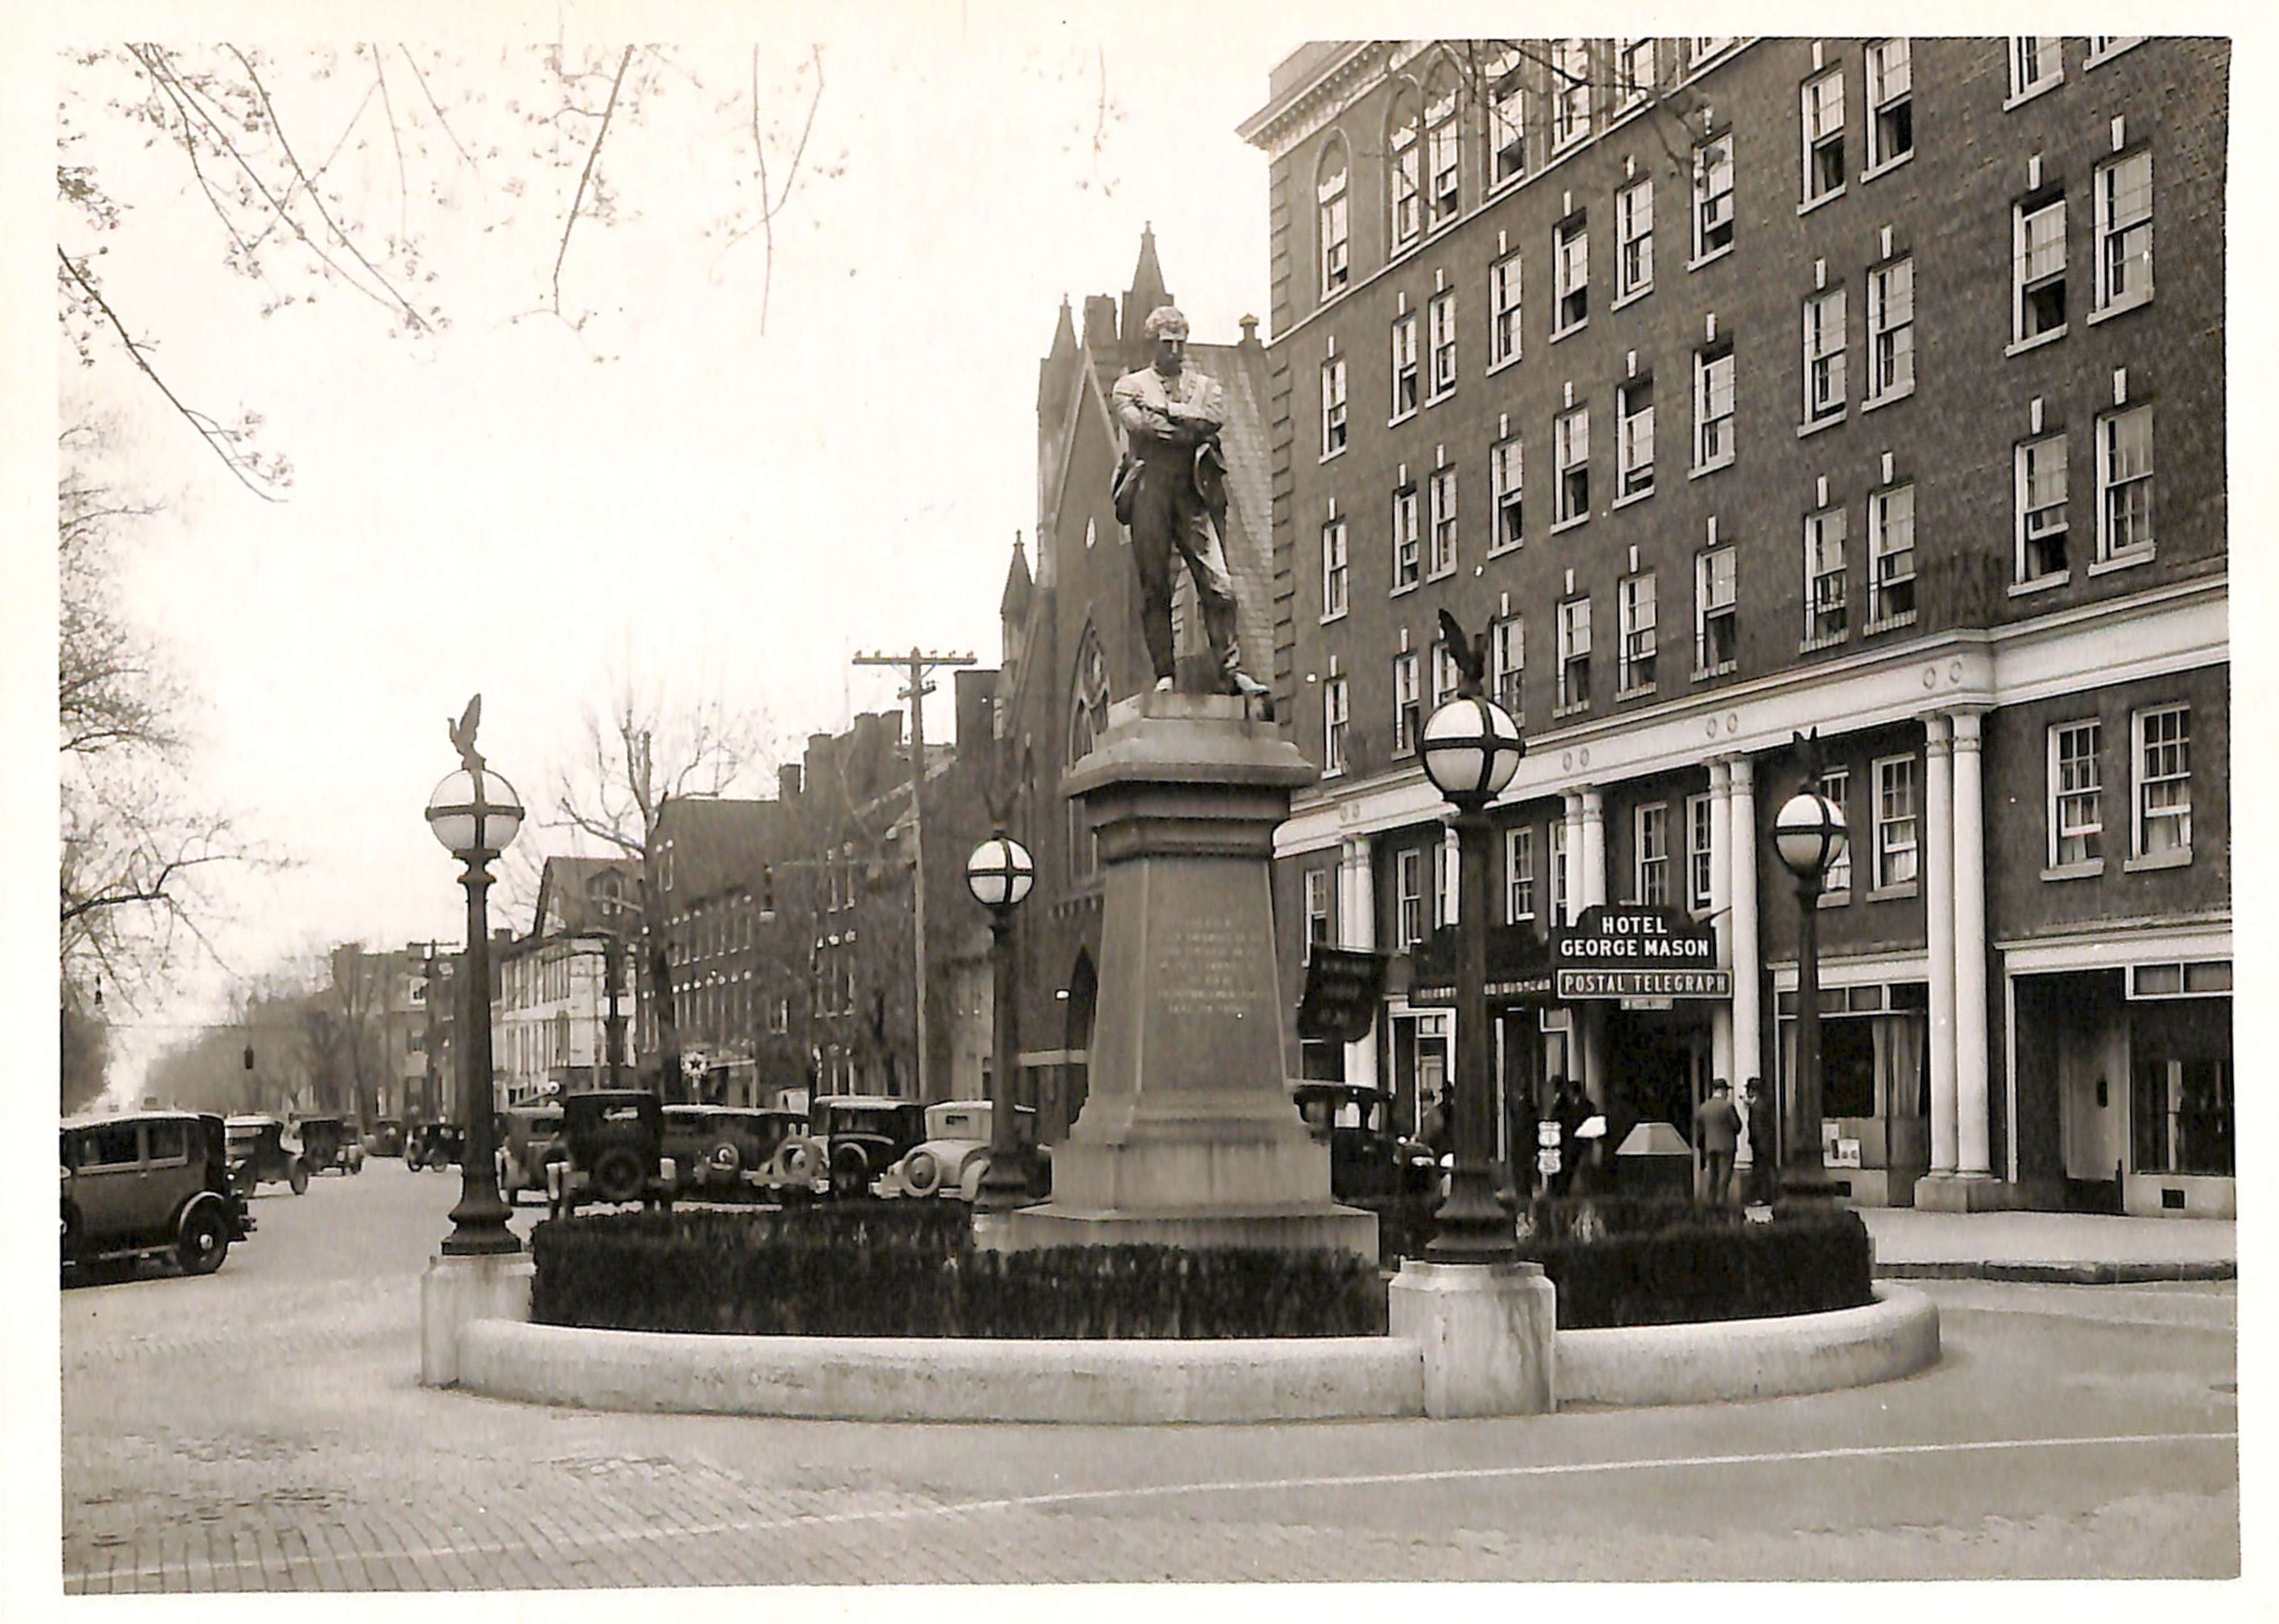 Confederate Monument in Alexandria, Before Widening of Street